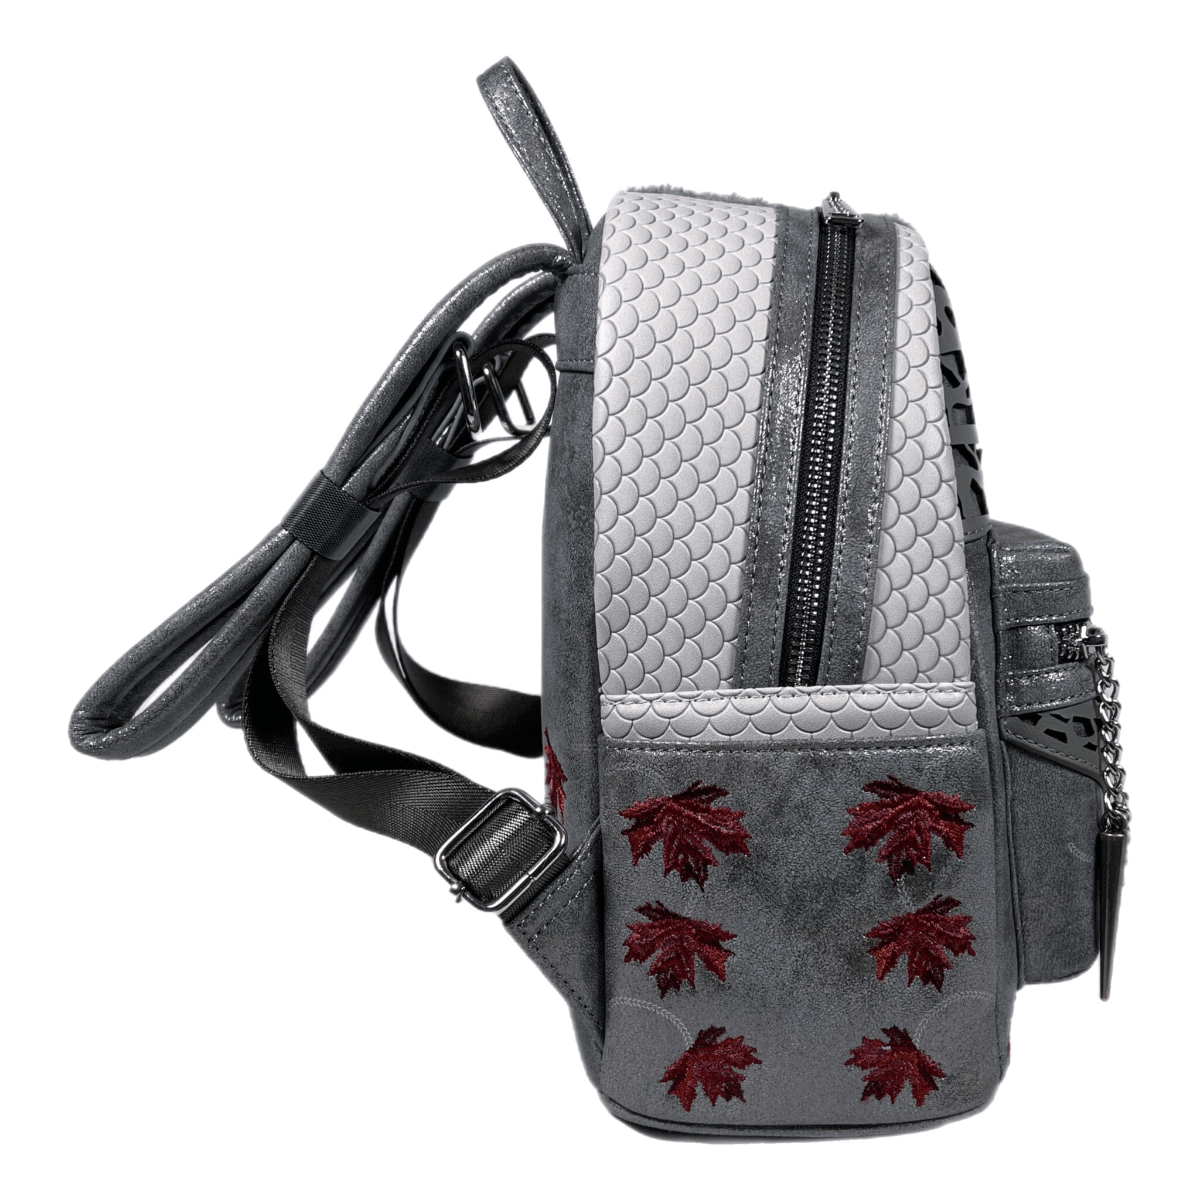 Game of Thrones - Sansa, Queen in the North US Exclusive Mini Backpack [RS] Backpack by Loungefly | Titan Pop Culture